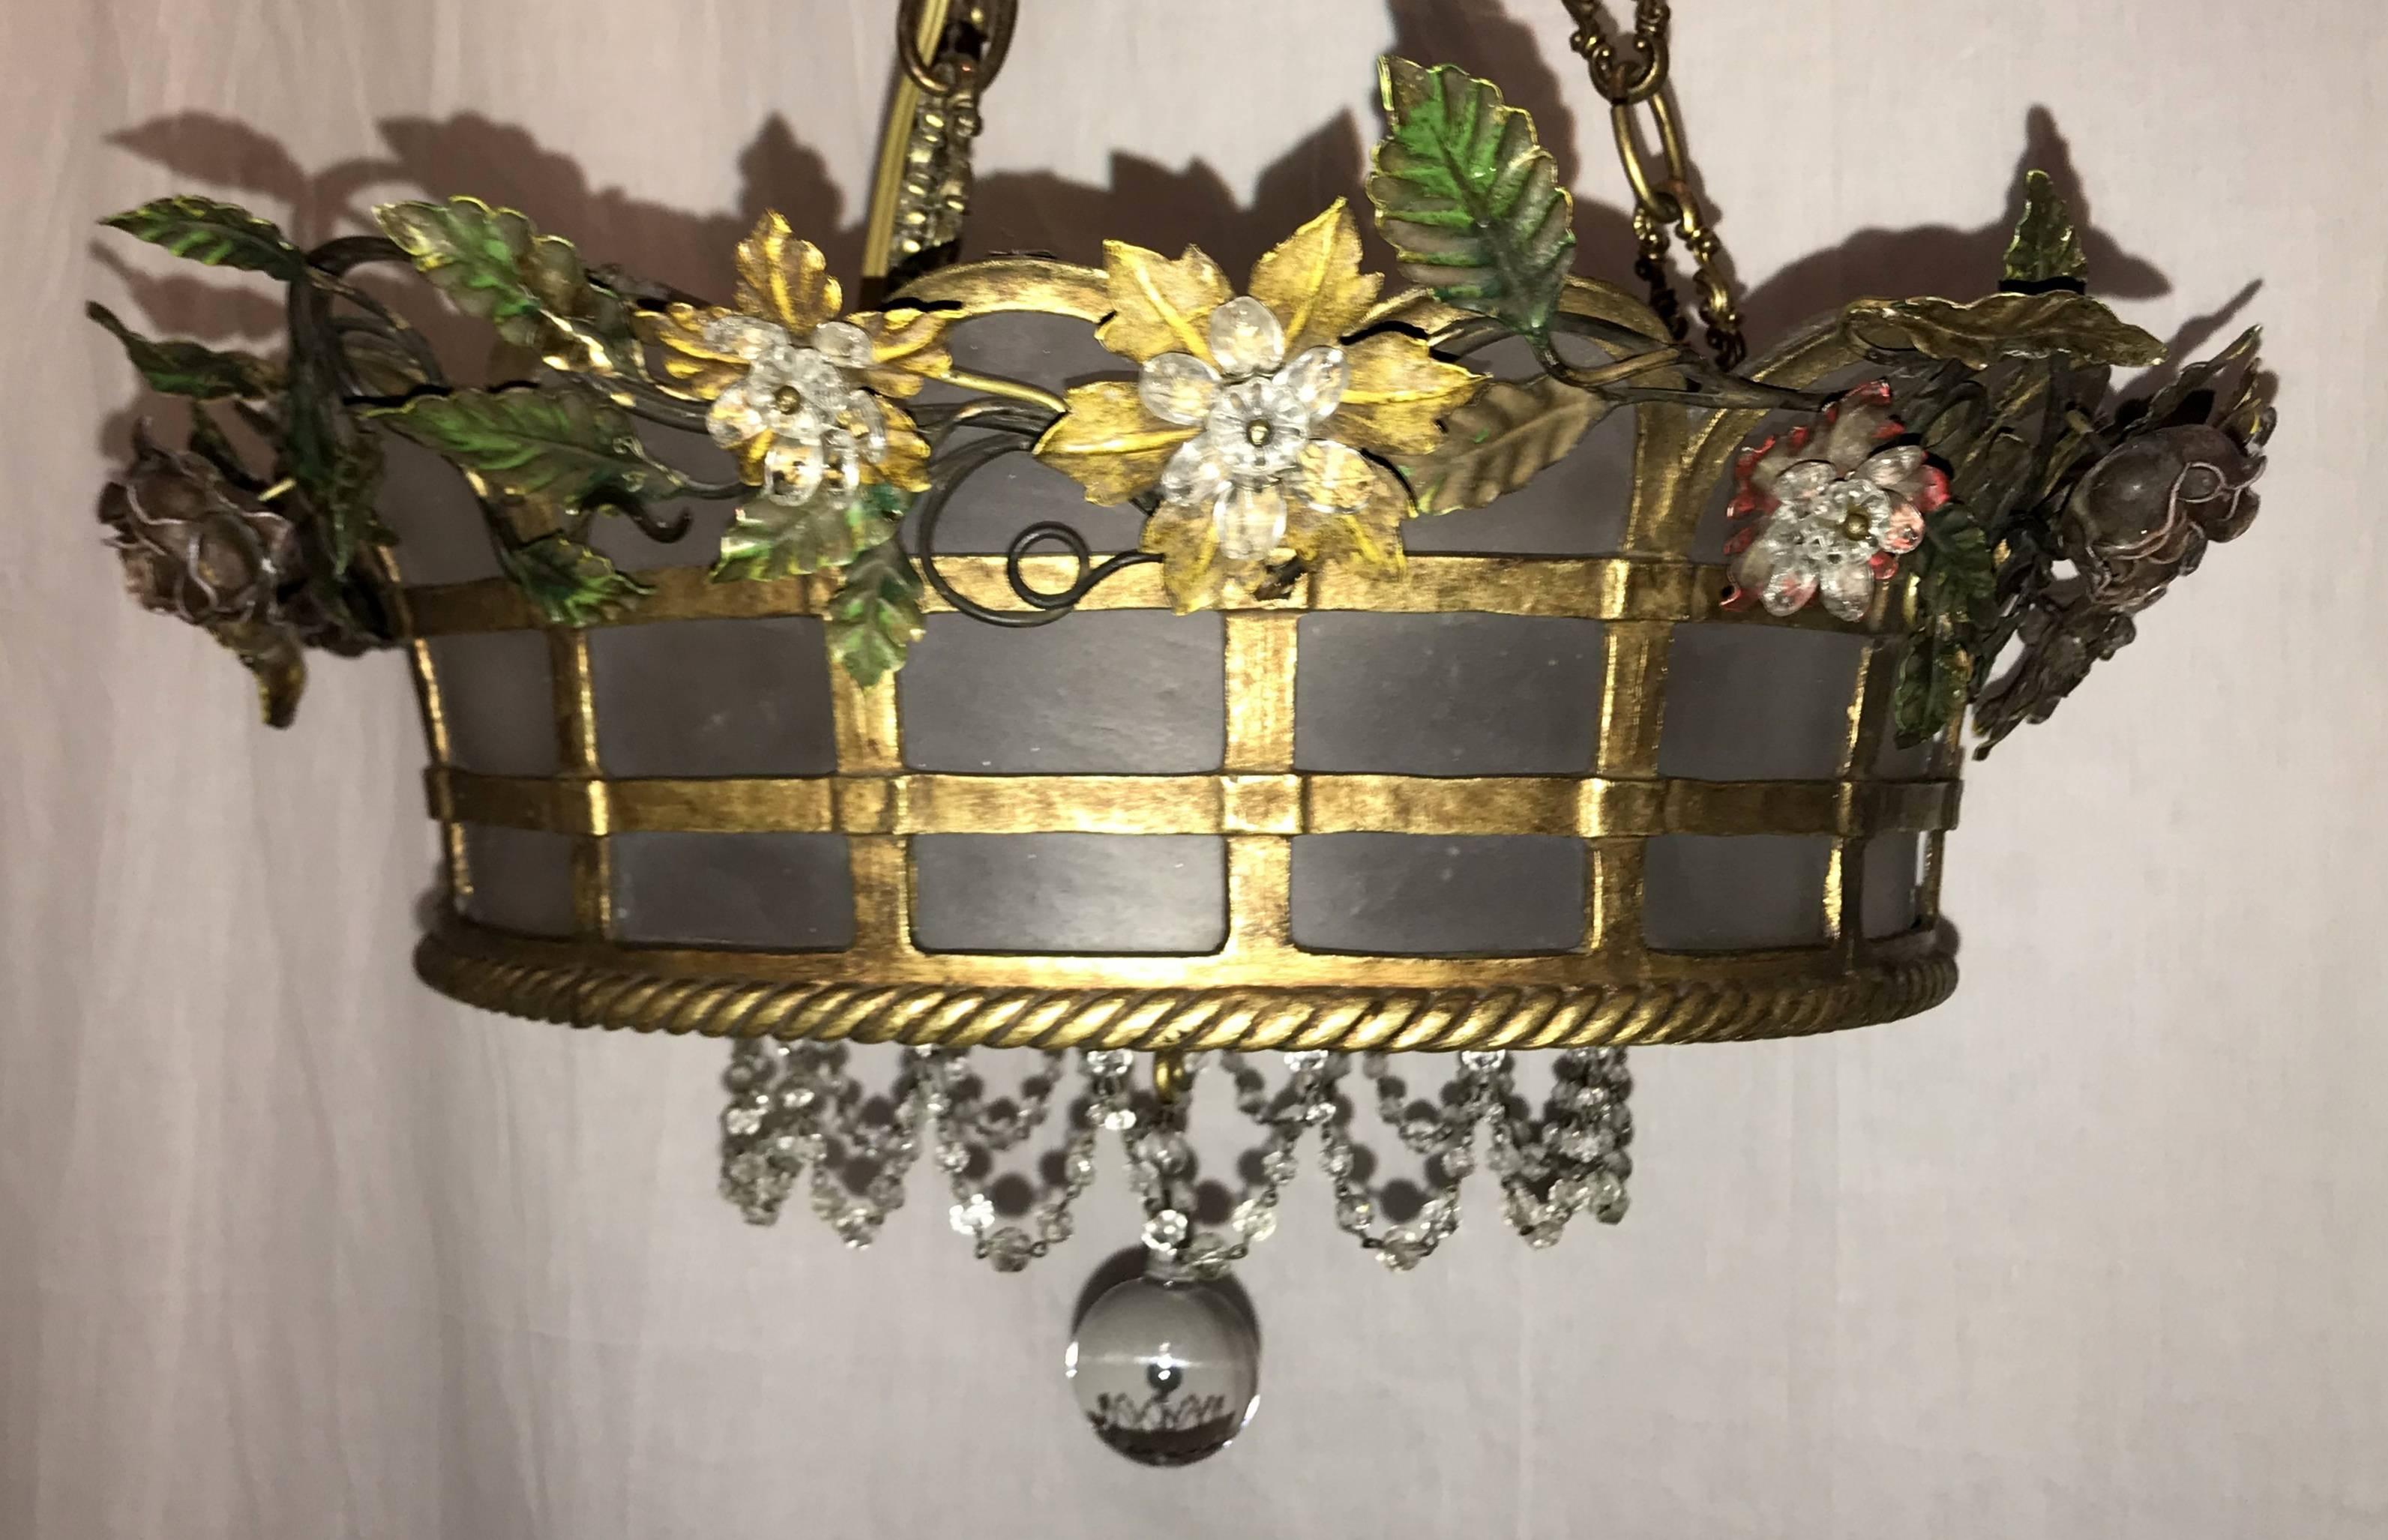 Wonderful French Bronze Frosted Glass Beaded Flower Basket Chandelier Fixture 1